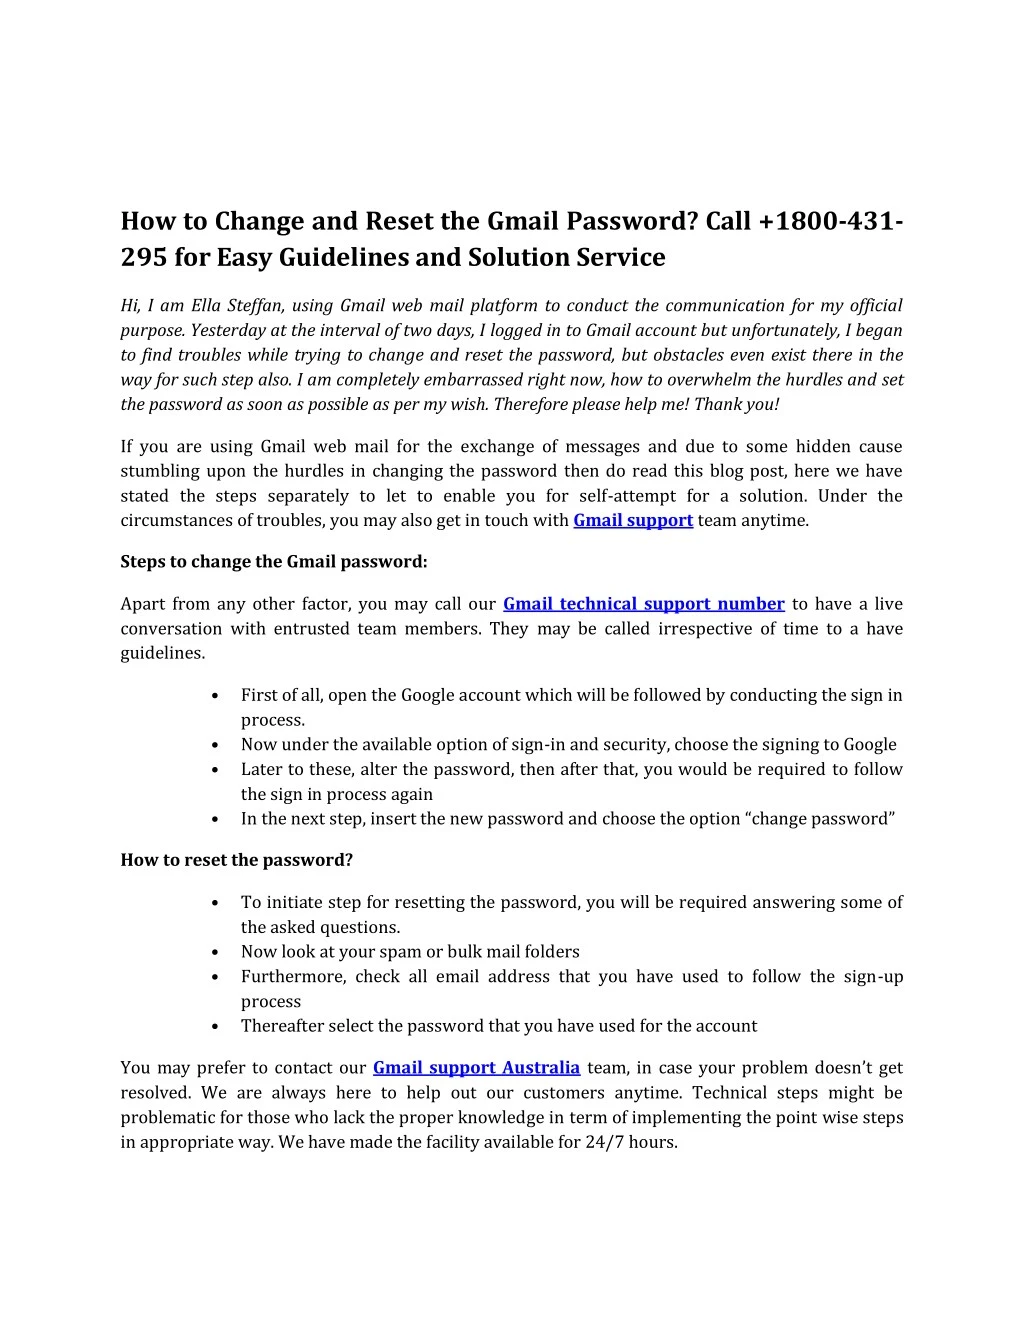 how to change and reset the gmail password call